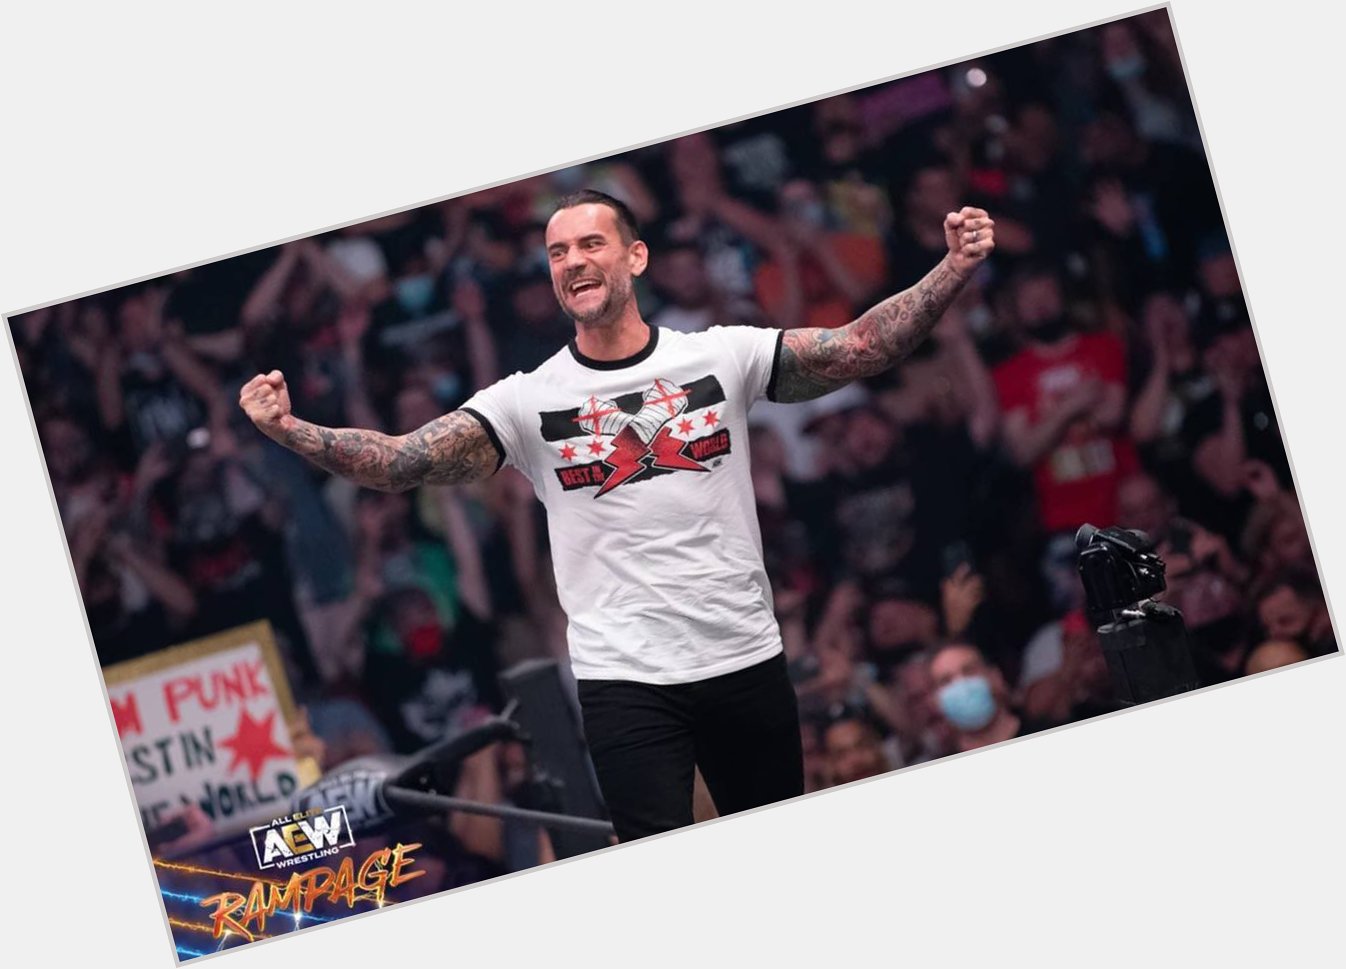 Happy birthday to the bitw, CM Punk. I am forever great to have him back wrestling again 